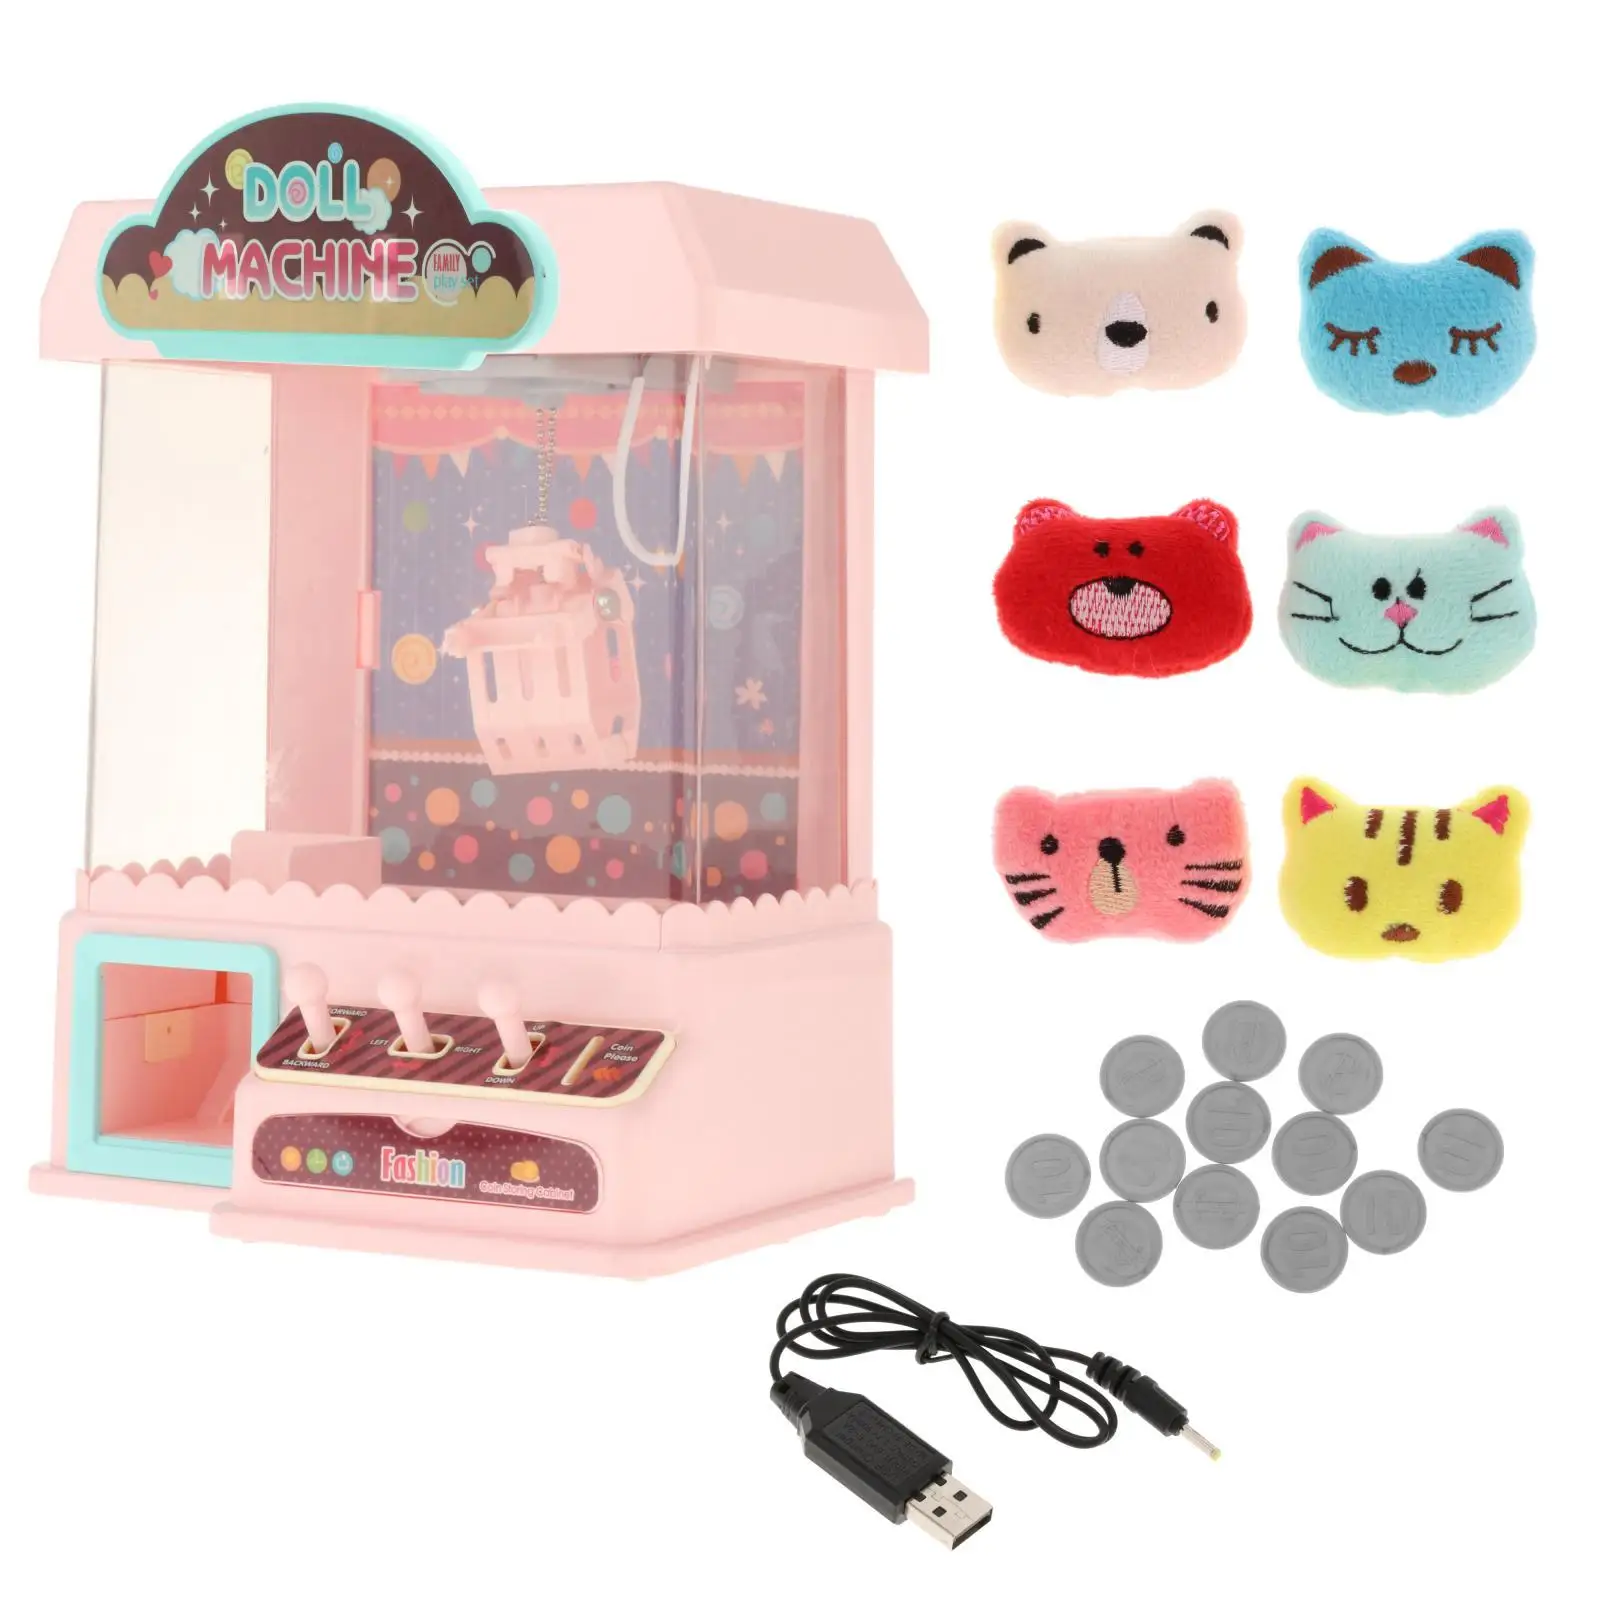 Rechargeable Claw Machine with 6 Dolls with Lights & Sounds Girl Grab Doll Clip Vending Grabber Machine for Kids Birthday Gifts